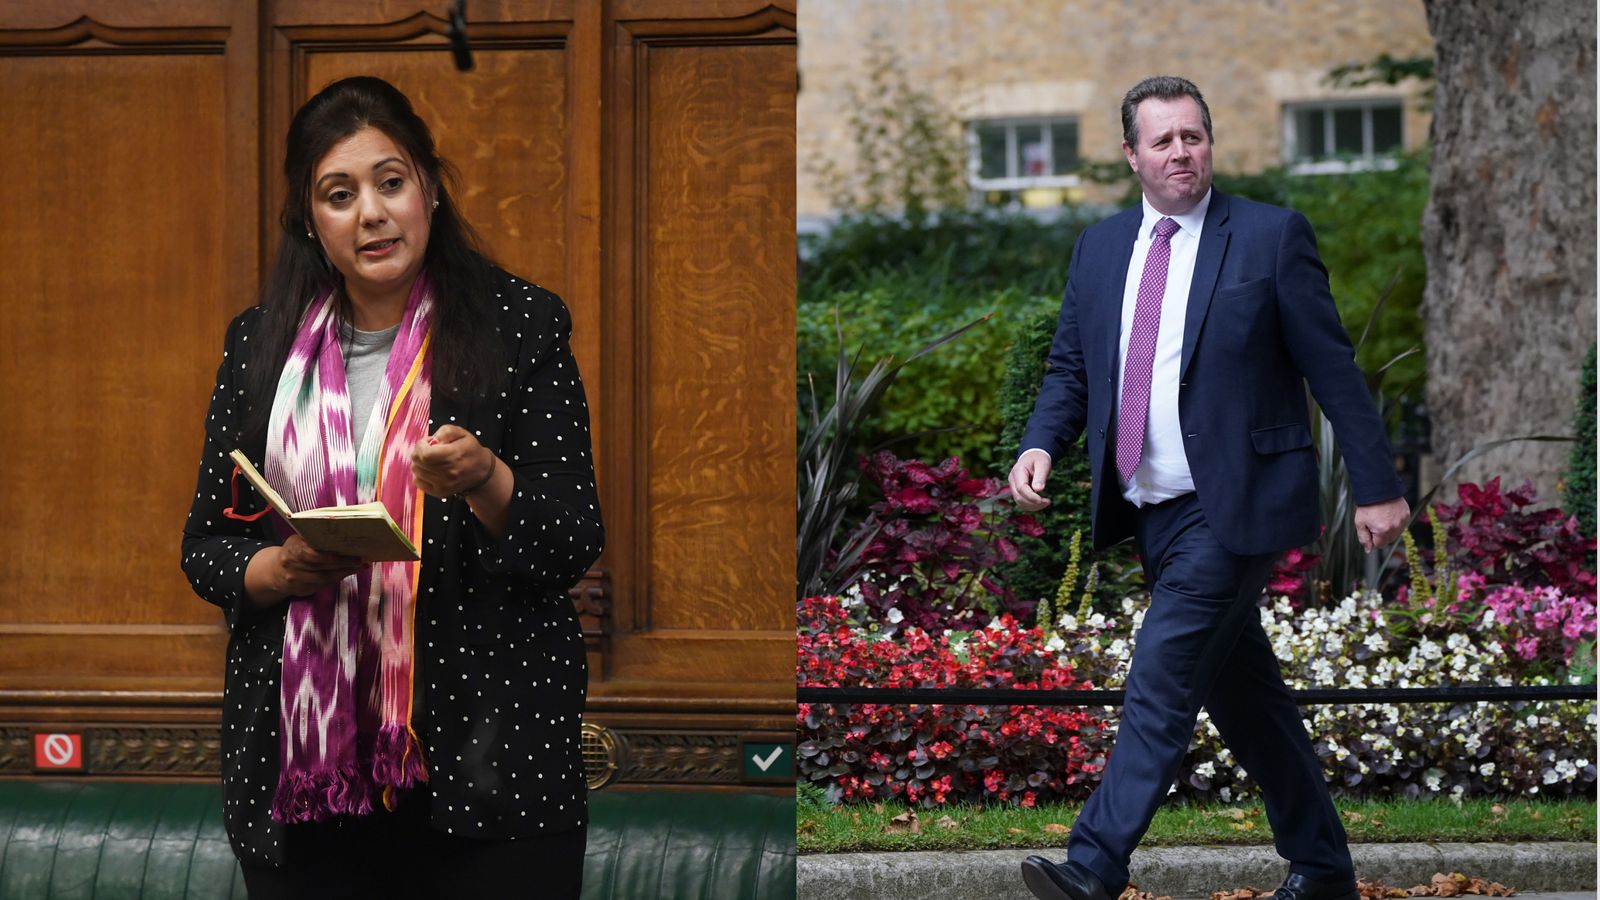 Chief whip denies claims he told Tory MP she was sacked as a minister due to her Muslim faith